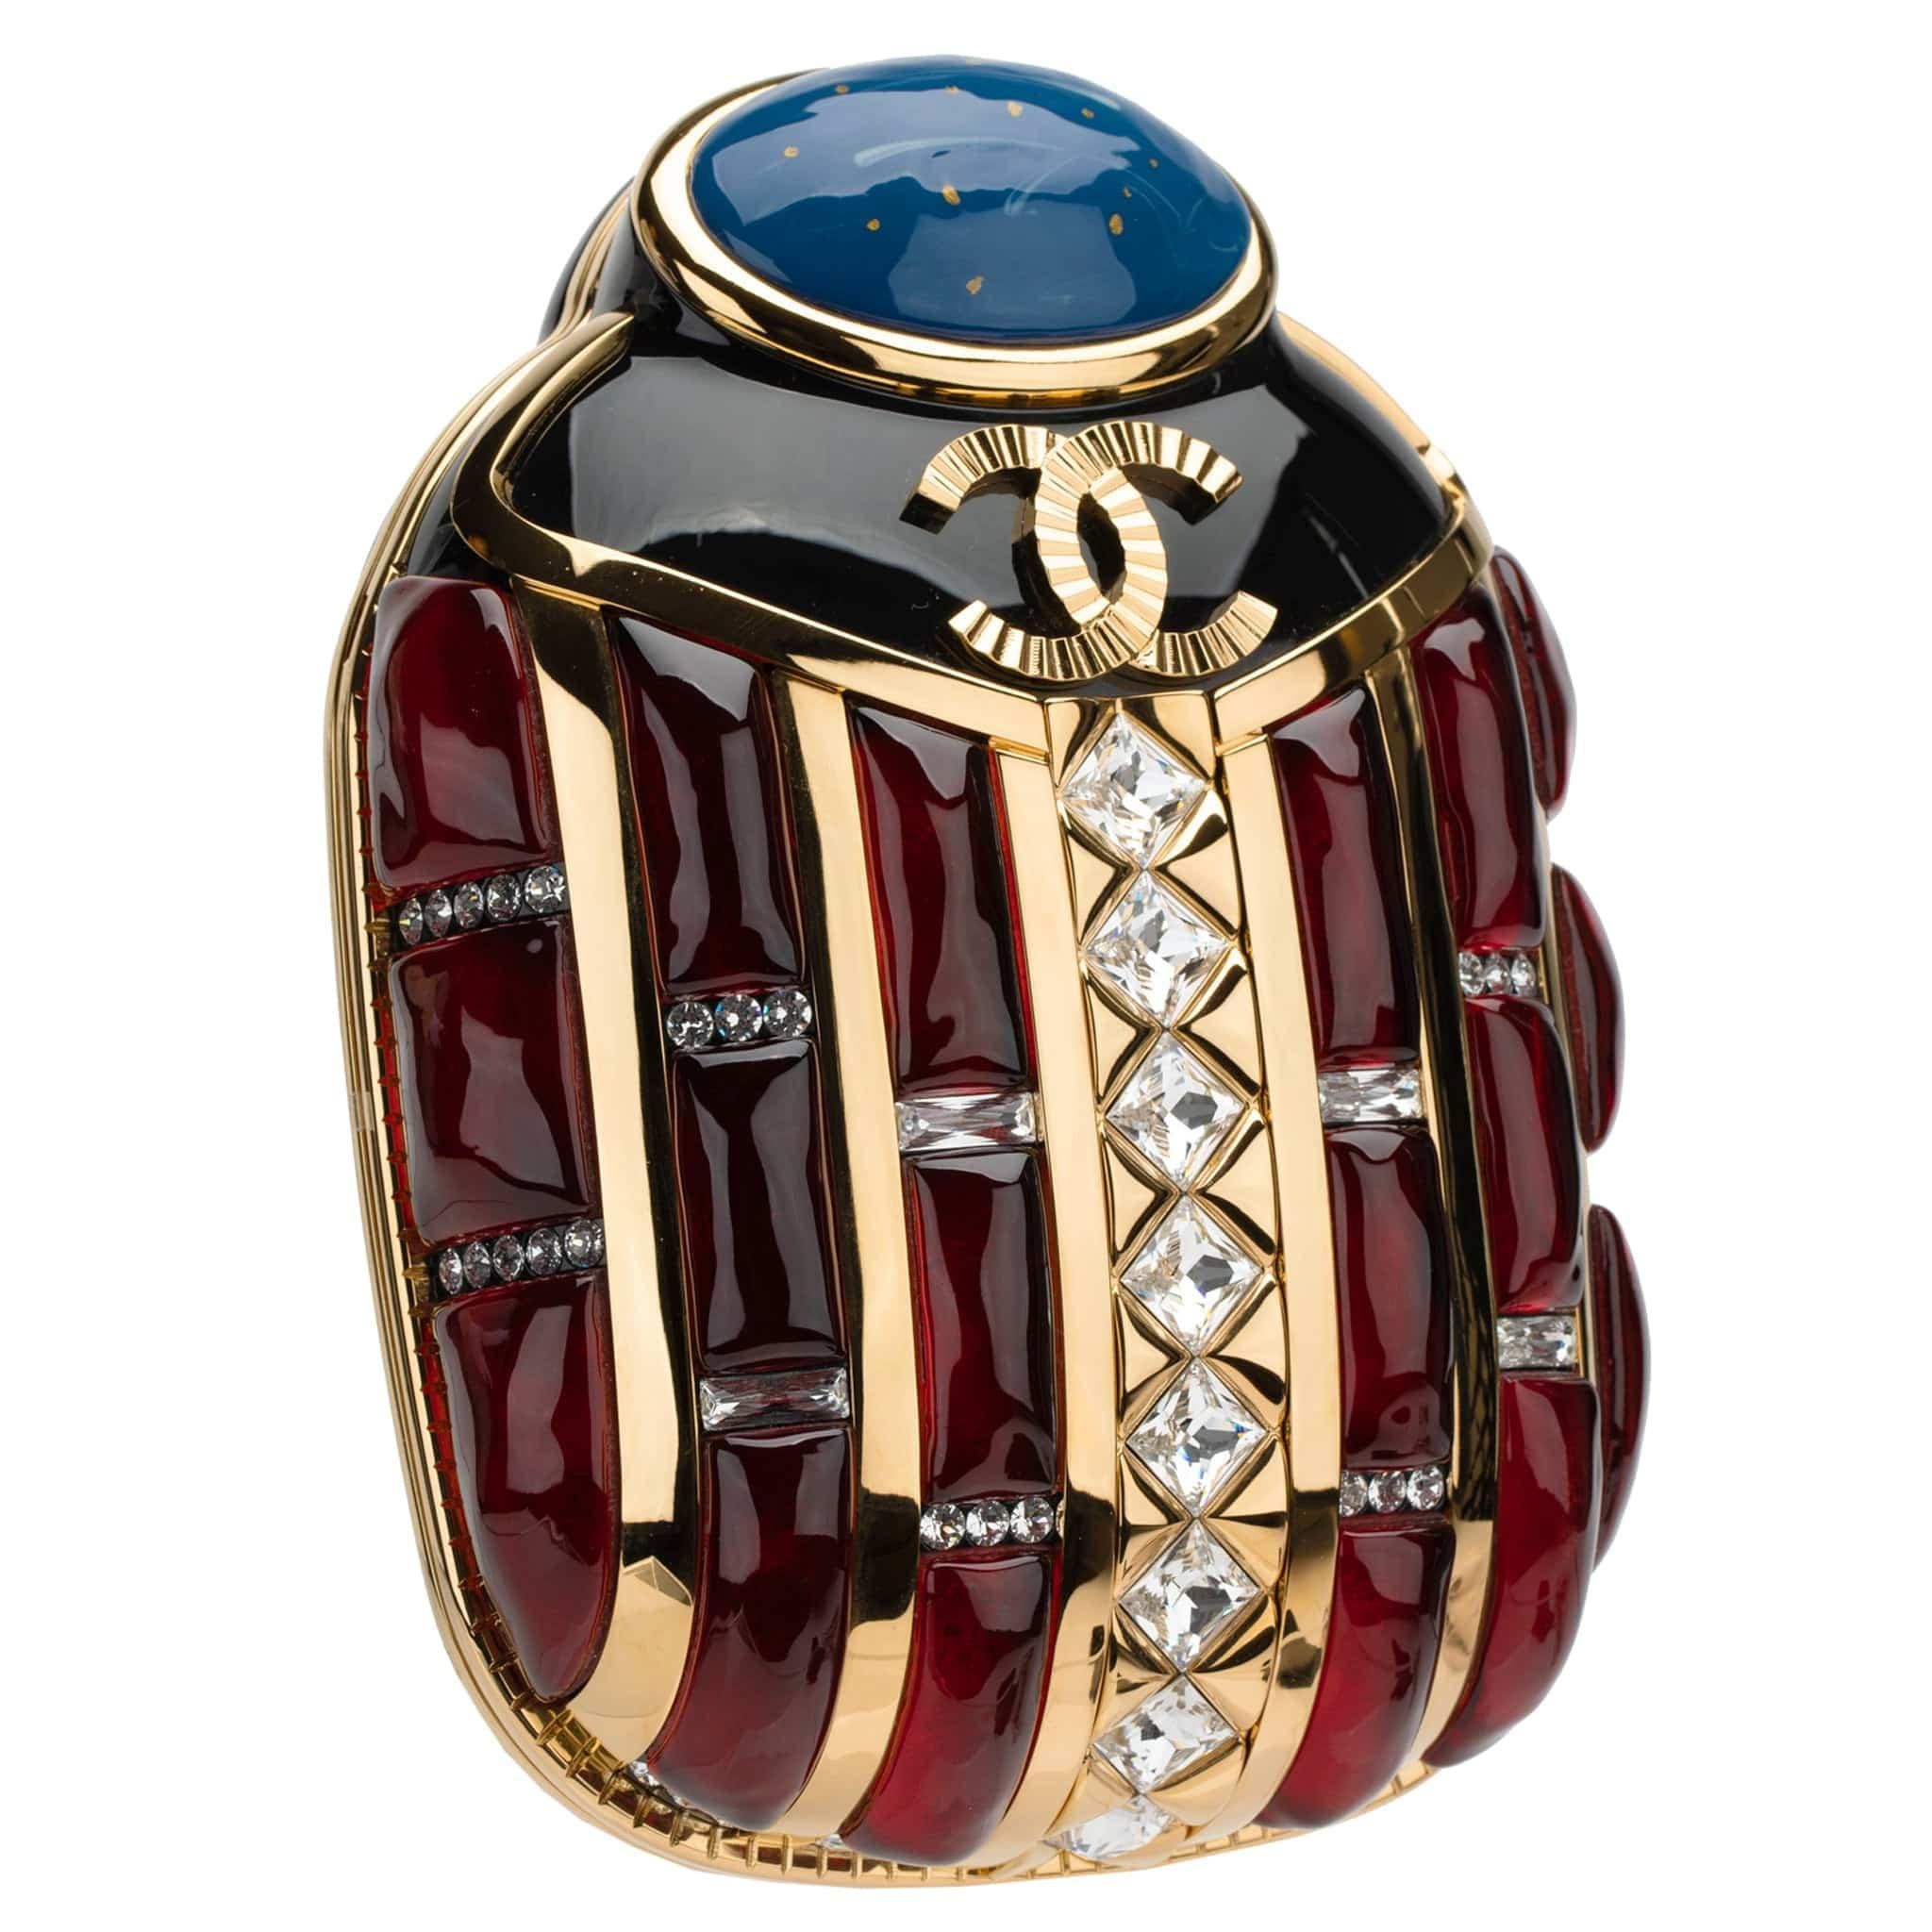 1stdibs Exclusives From Three Over Six

Brand: Chanel
Style: Egyptian Scarab Minaudière 
Size: 7.9’ x 5.5’ x 2.8’ Inch
Color: Black, Gold, Blue, Red
Material: Resin, Strass
Hardware: Gold
Year: Pre-Fall Métiers d’Art 2019

Condition: 
The product is